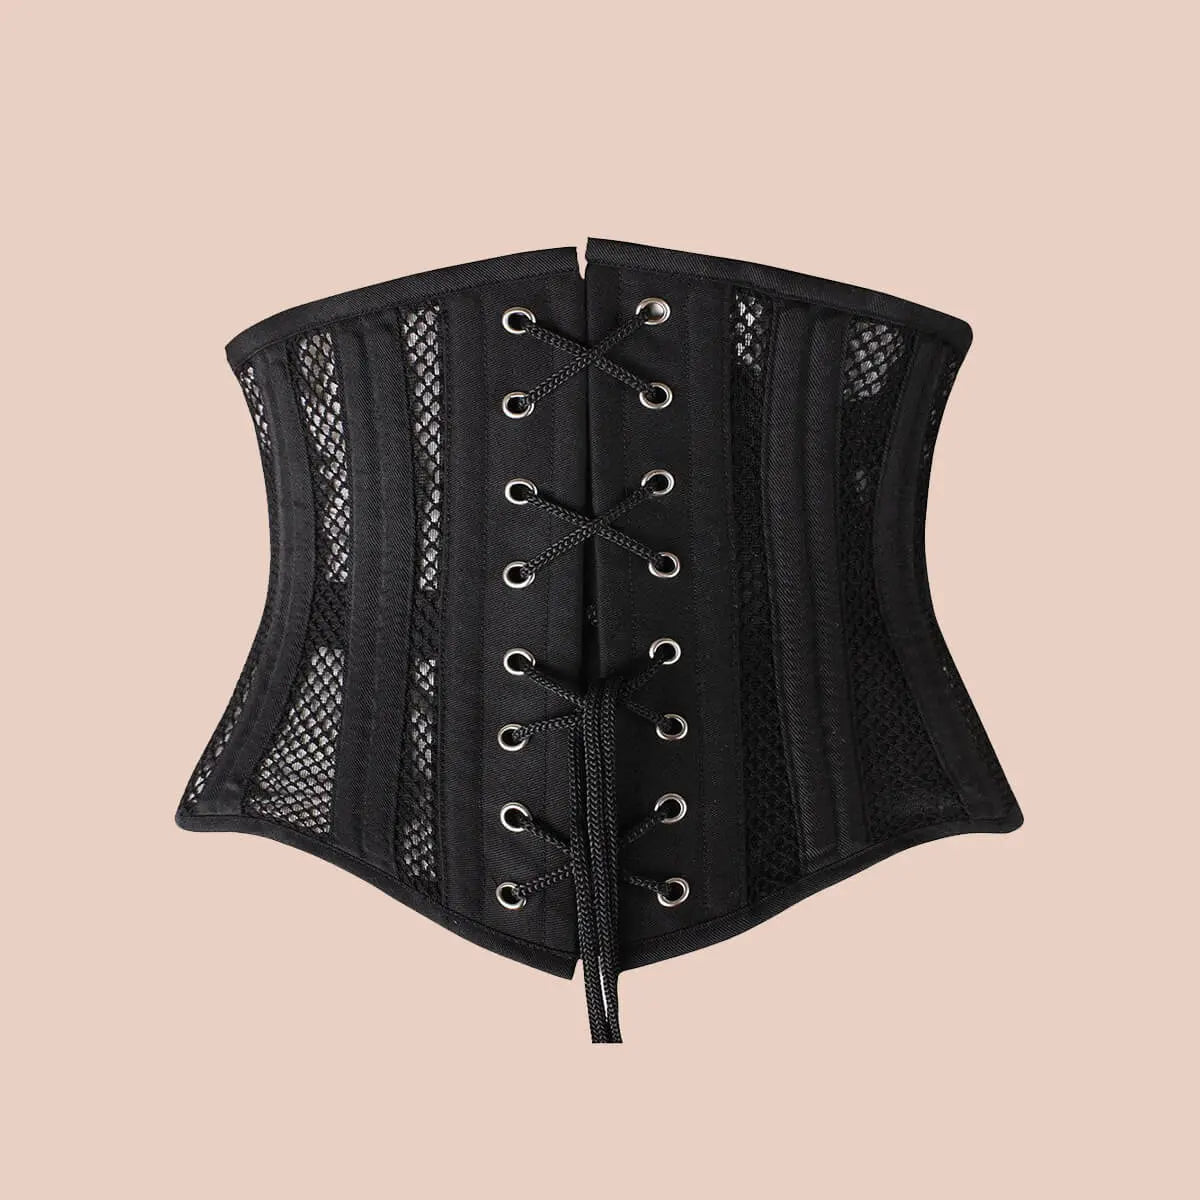 XL black Shaperx double strap waist trainer for workout or body